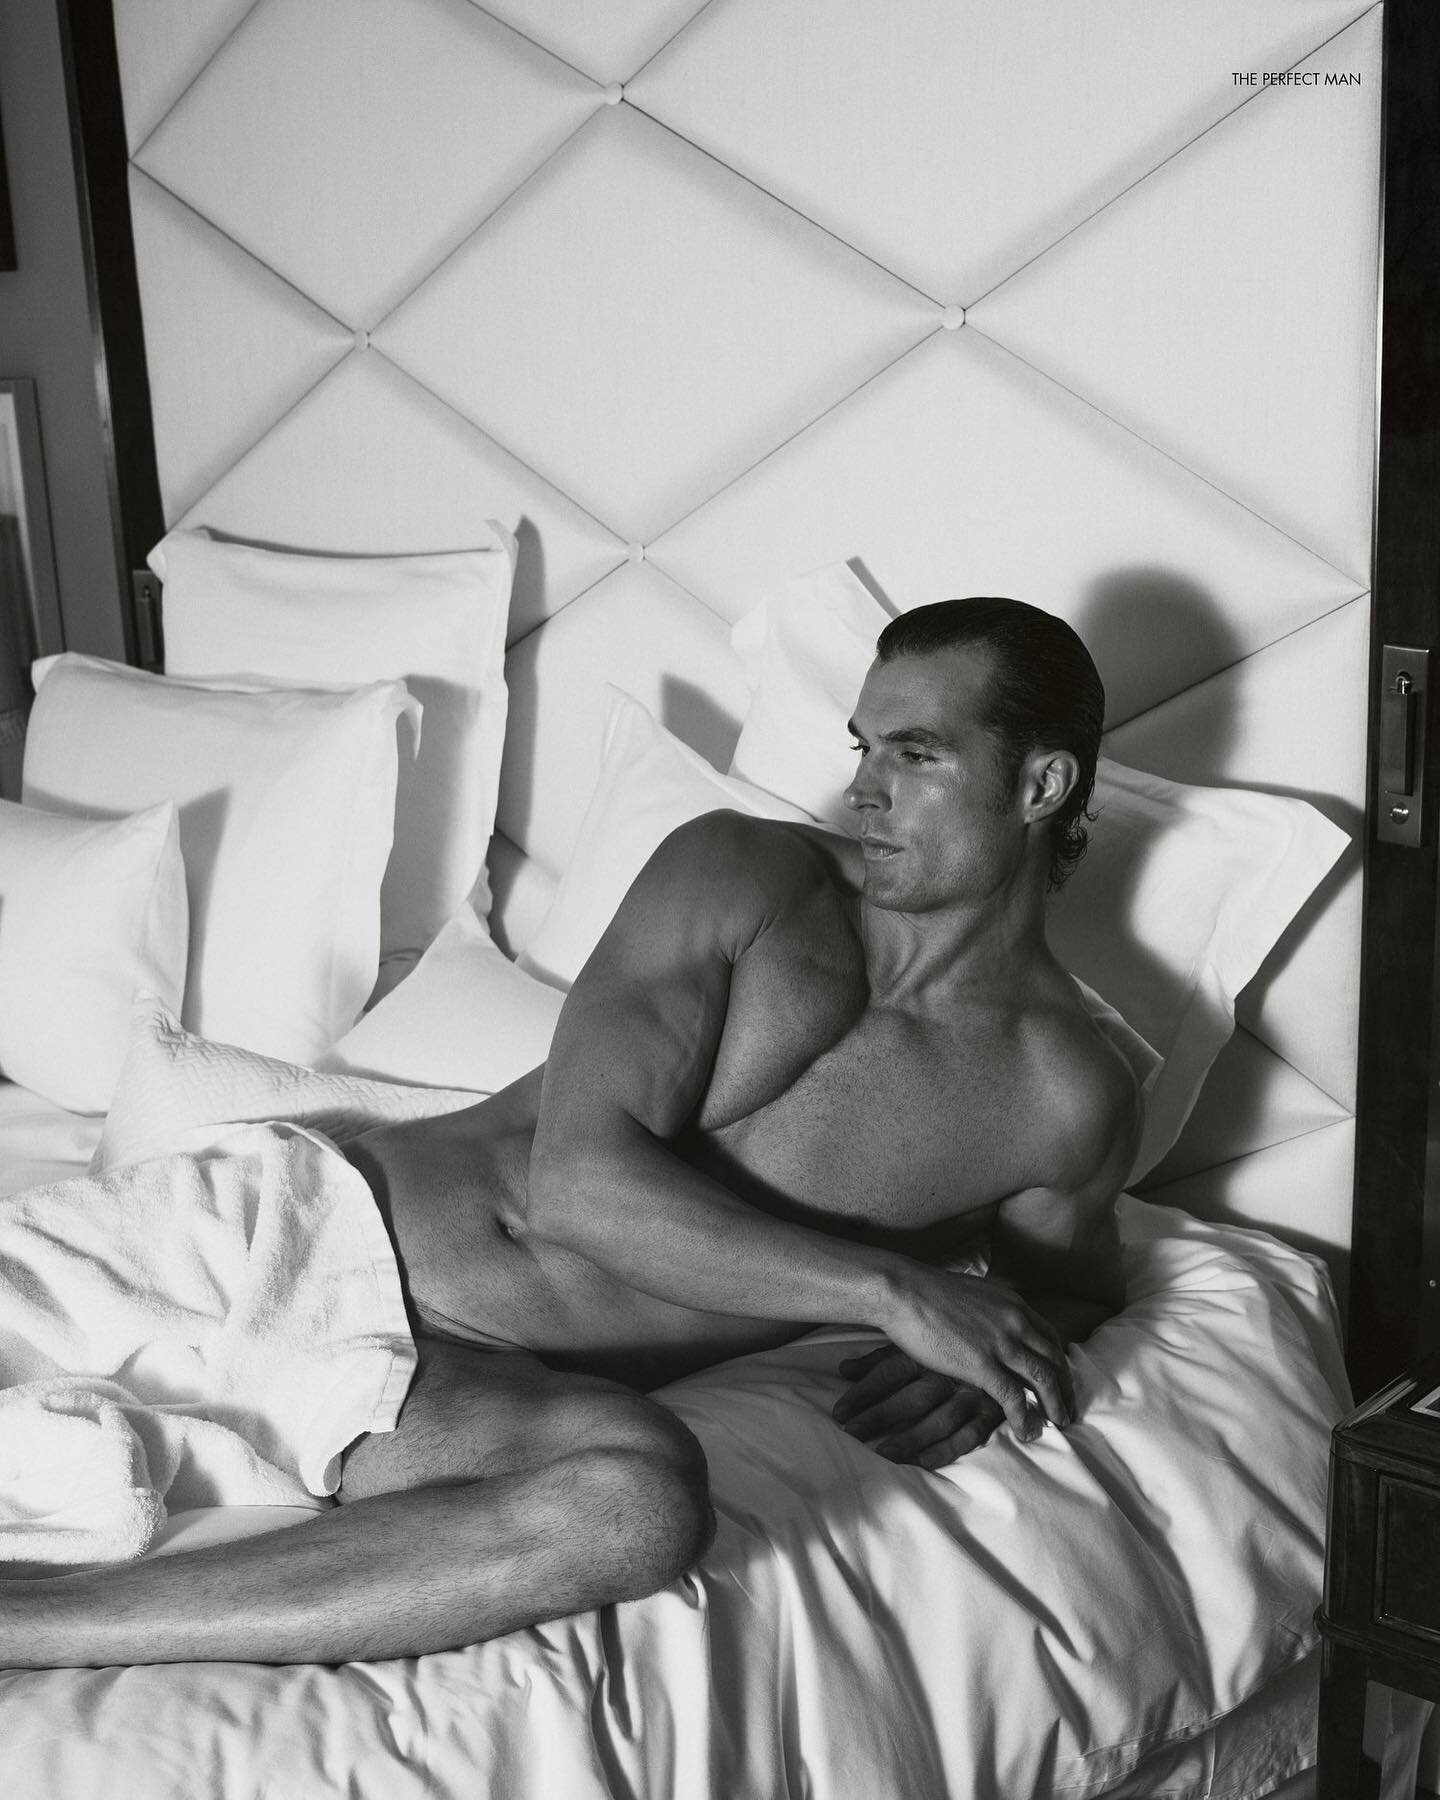 (UN)DRESSED: Top Model Walter Savage is not a stranger to hotel rooms. In this very special portfolio by New York photographer Anna Garbowska, Mr. Savage gets lensed dressed and undressed owning his timeless masculine sex appeal. 
&mdash;
Tap link in